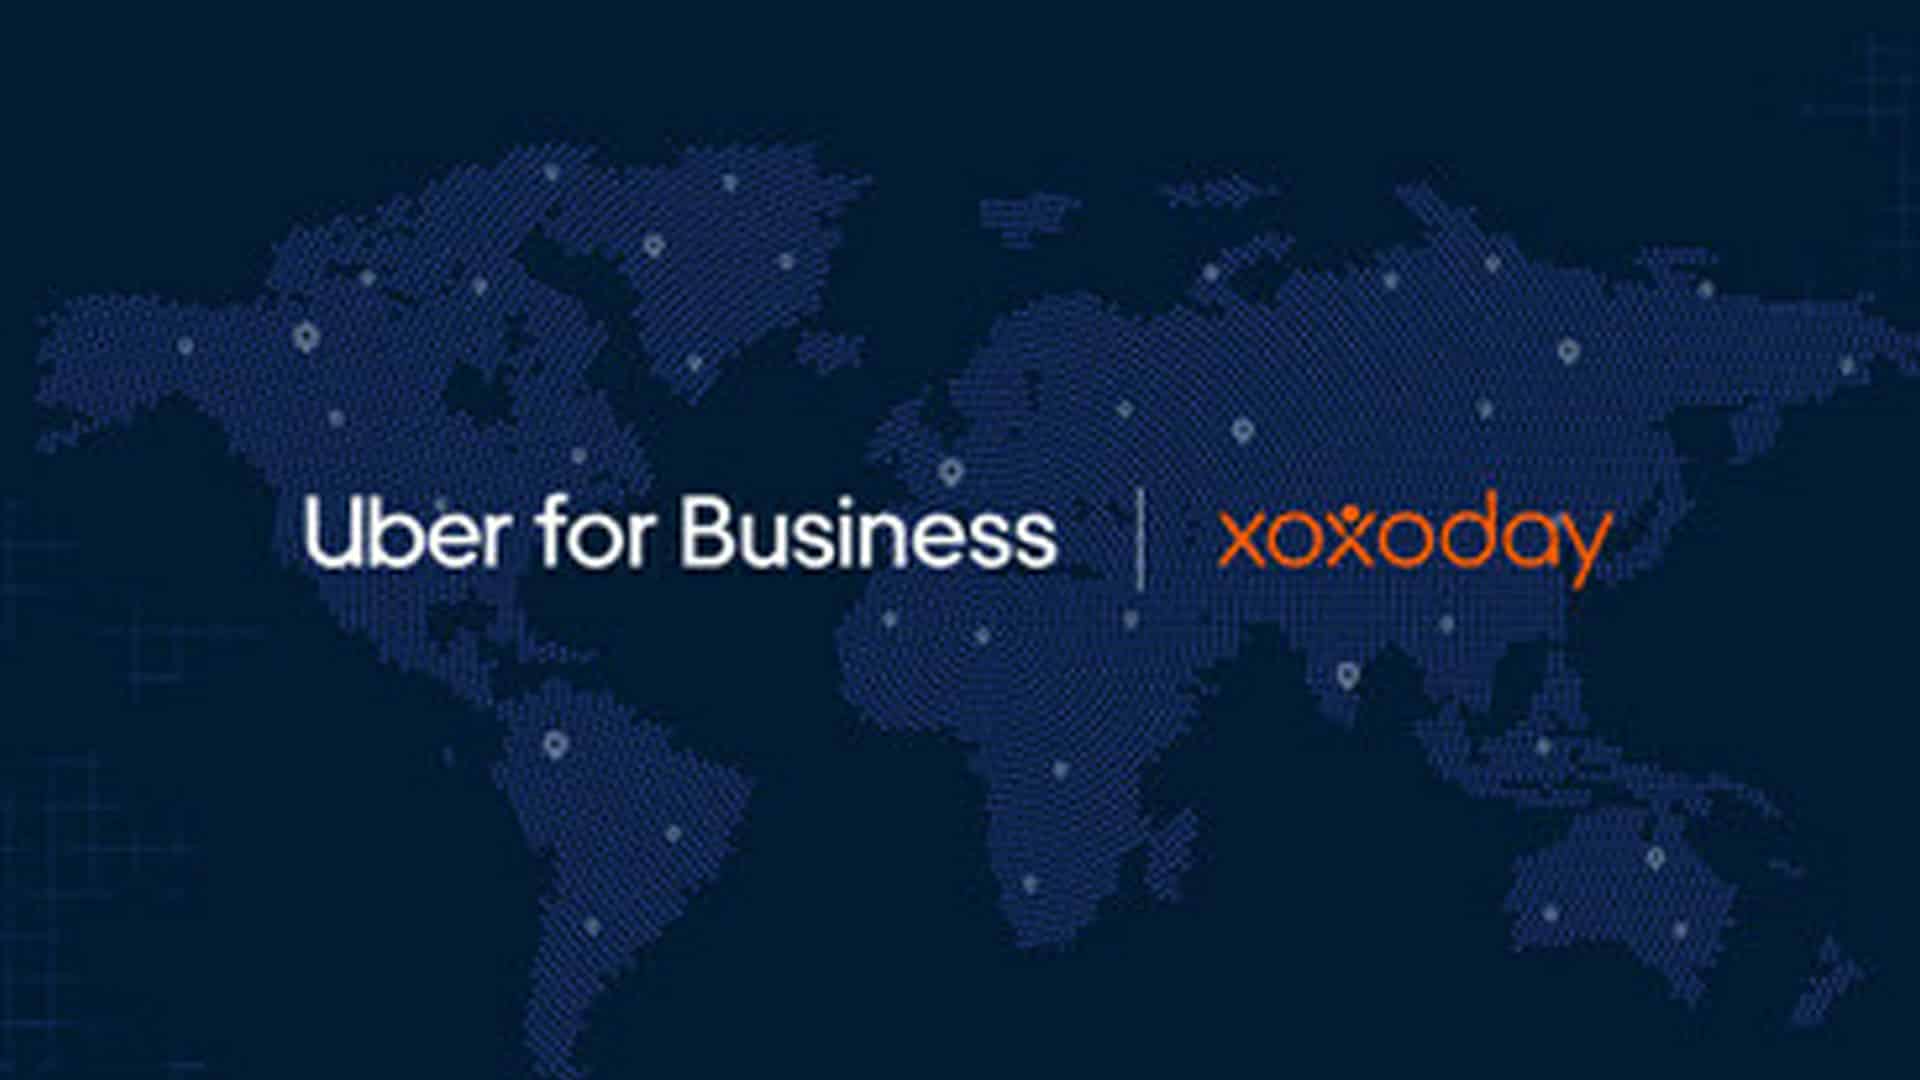 Uber for Business's exclusive partnership with Xoxoday: Now spreading delight together in over 60 countries